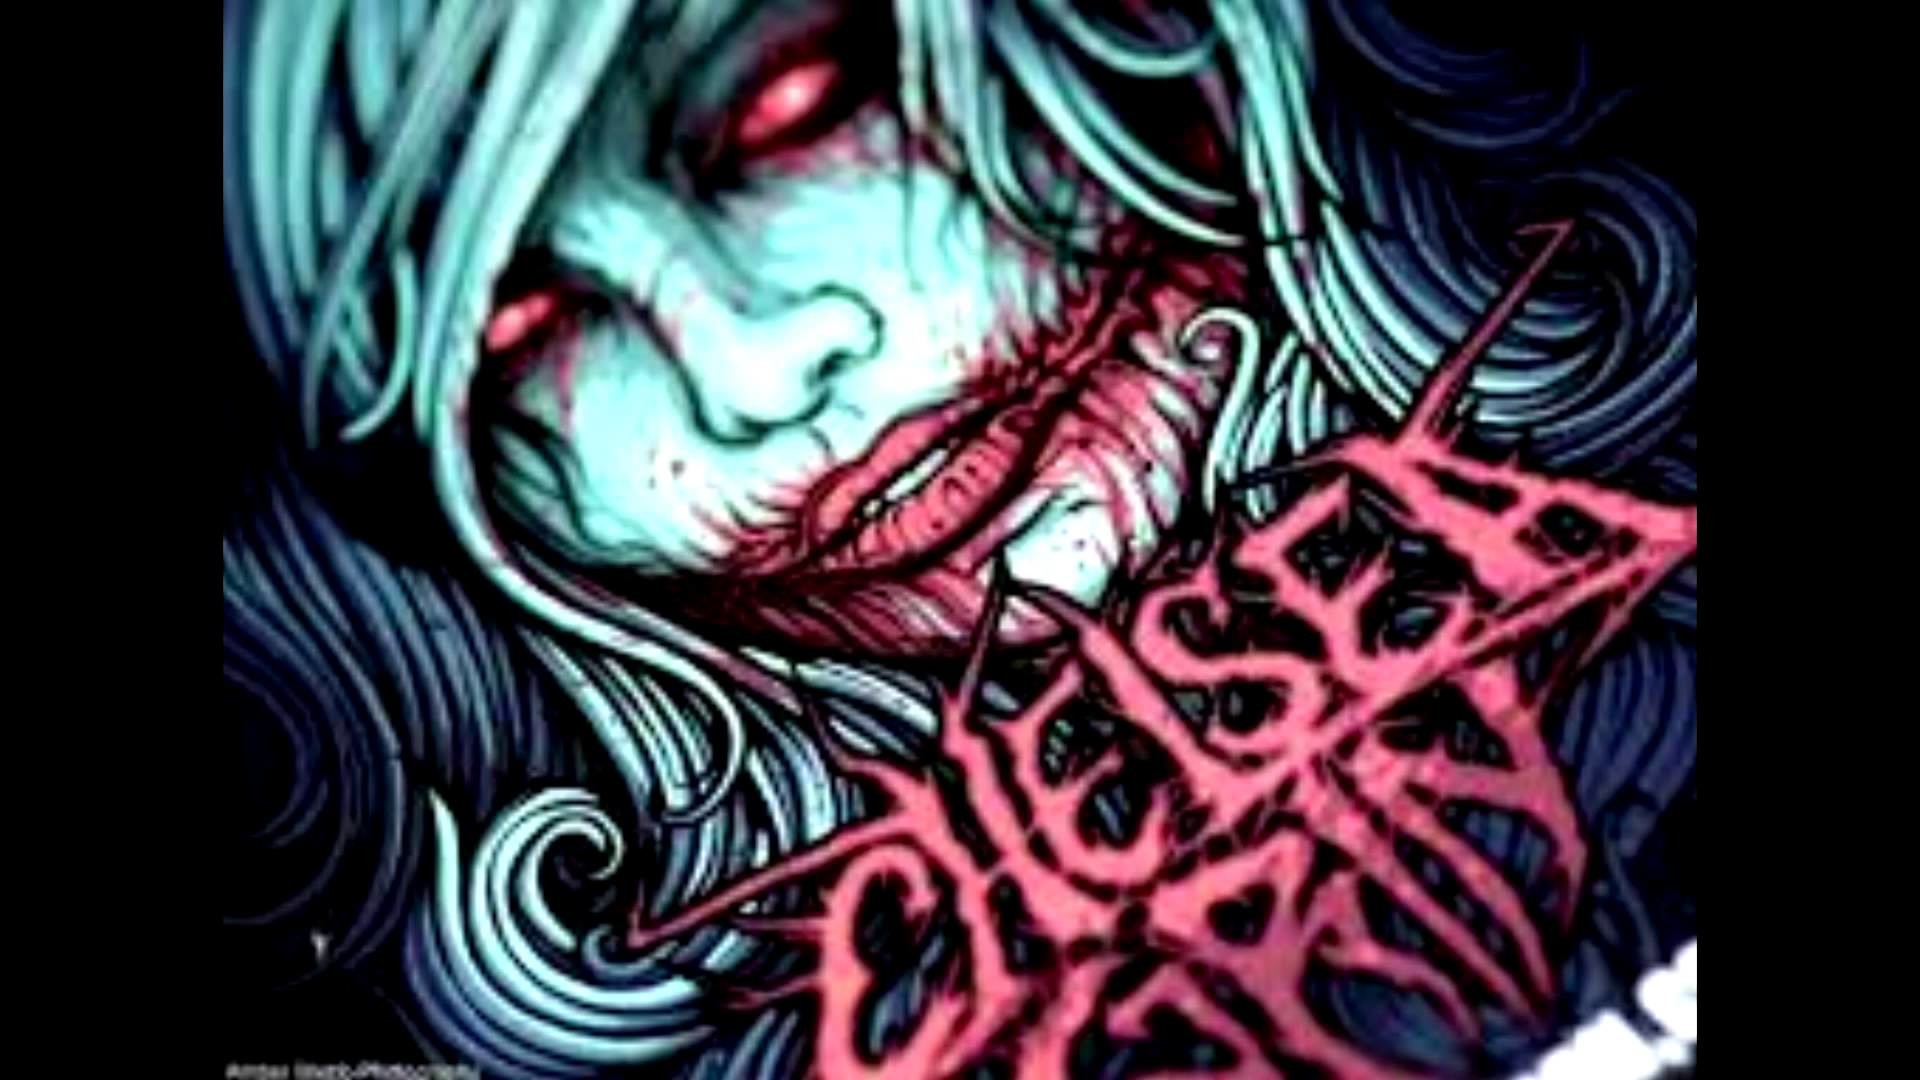 Chelsea Grin – Lilith